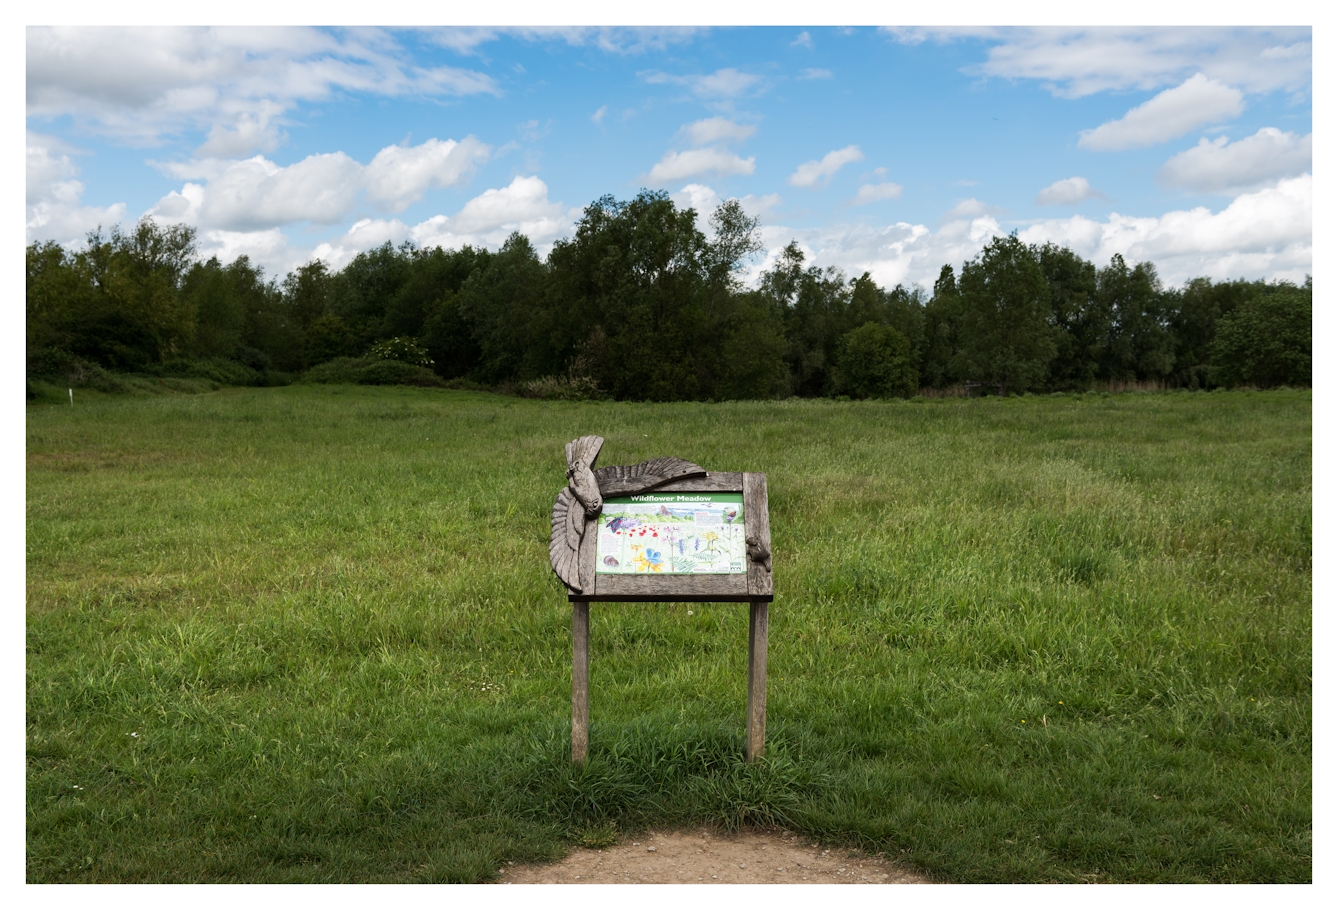 Colour photograph of a green expanse of grassland in a country park setting. In the distance is a row of trees and shrubs stretching from left to right. In the centre of the image is a small wooden board on two posts with a large white illustrated information sheet attached to it, showing flowers and insects. The title ‘Wildflower Meadow’ can just be made out. The frame around the board is adorned with a large wooden carved bird of prey on the top left and a small mammal on the bottom right.